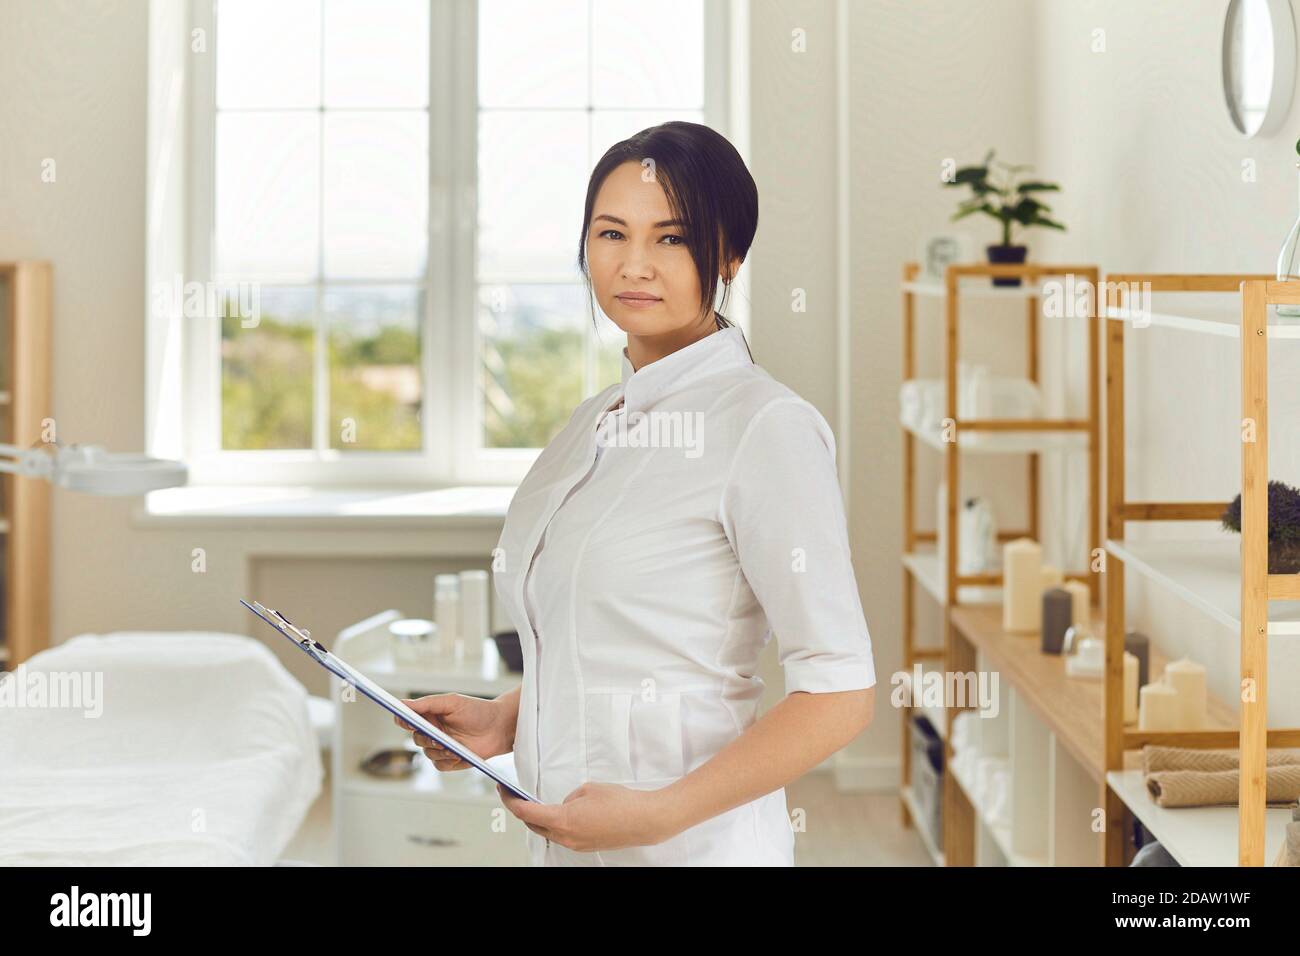 Serious professional beautician standing in her beauty salon and looking at camera Stock Photo